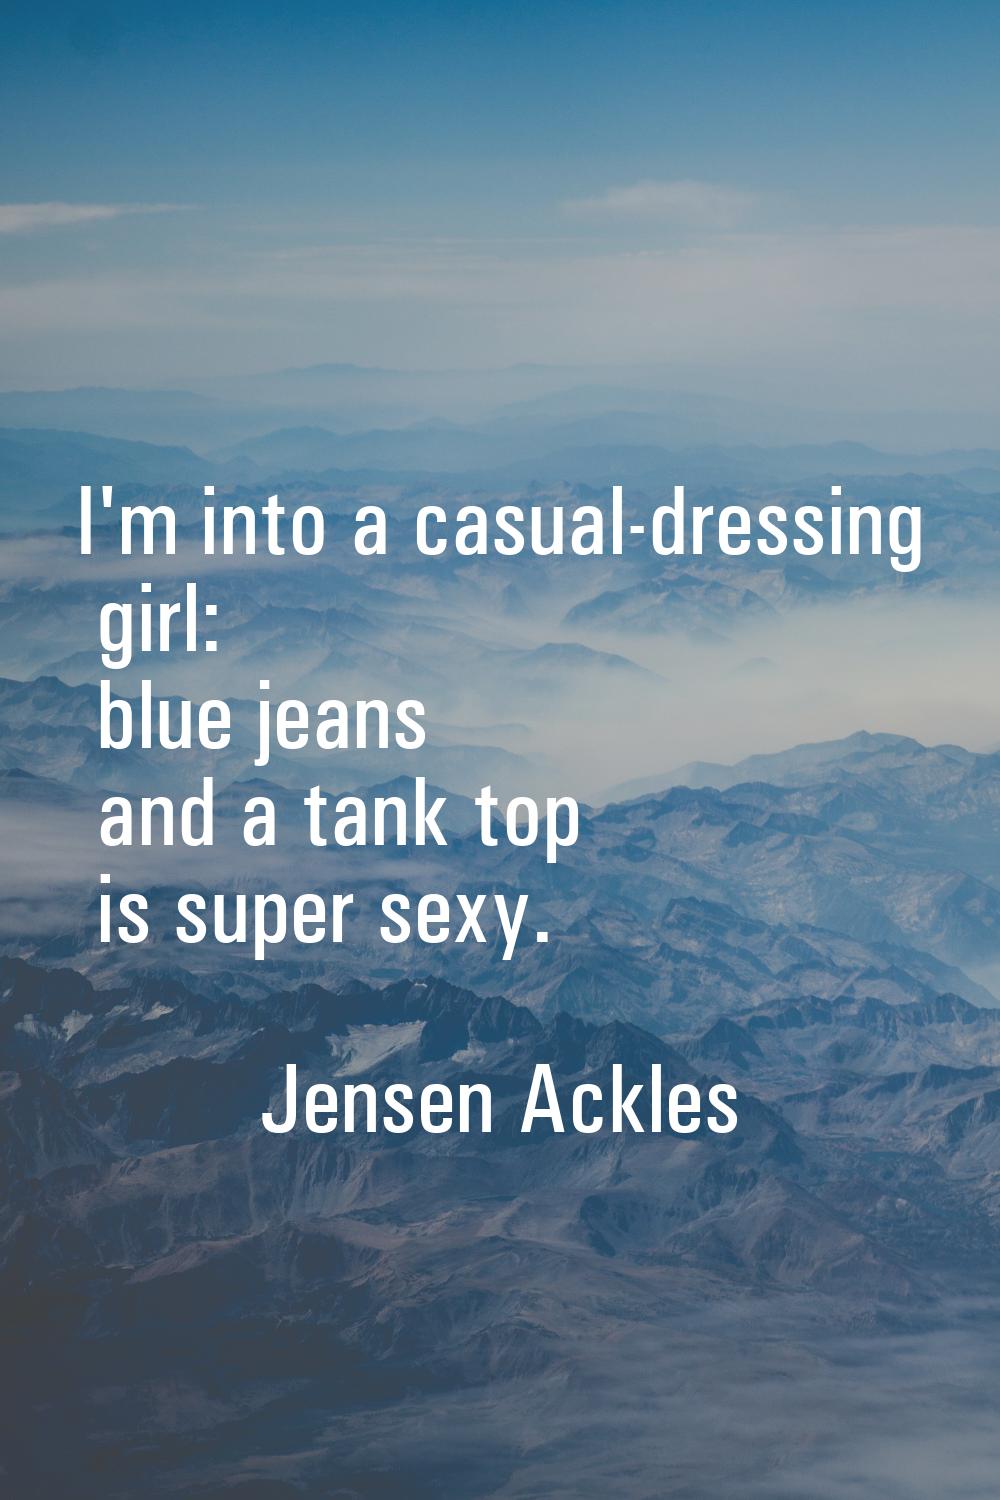 I'm into a casual-dressing girl: blue jeans and a tank top is super sexy.